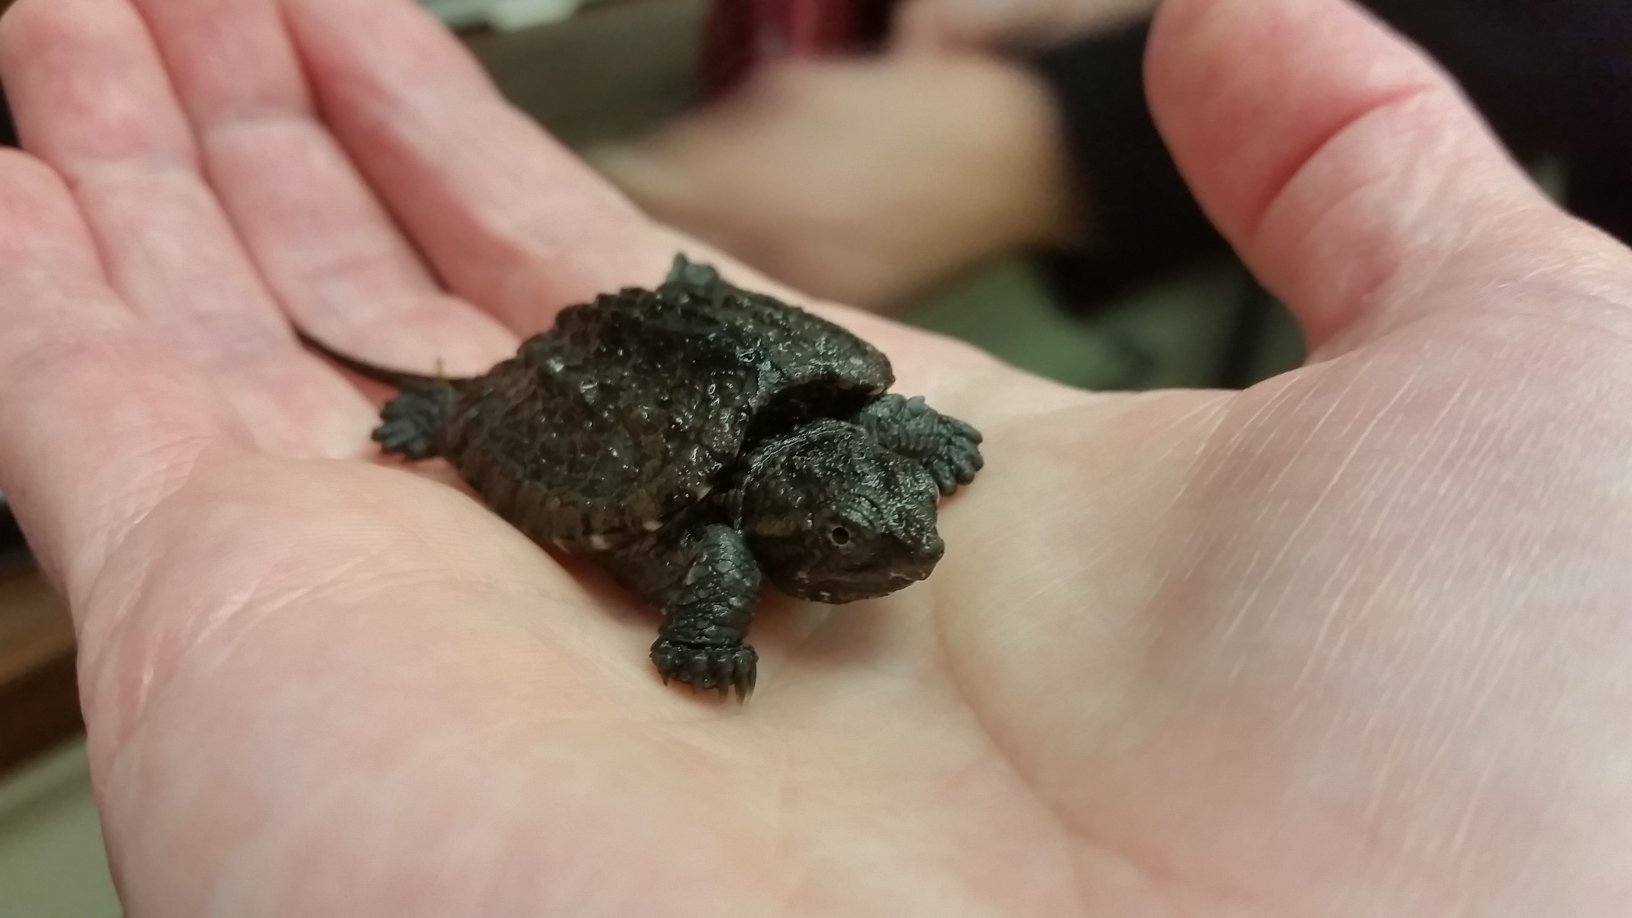 baby snapping turtle